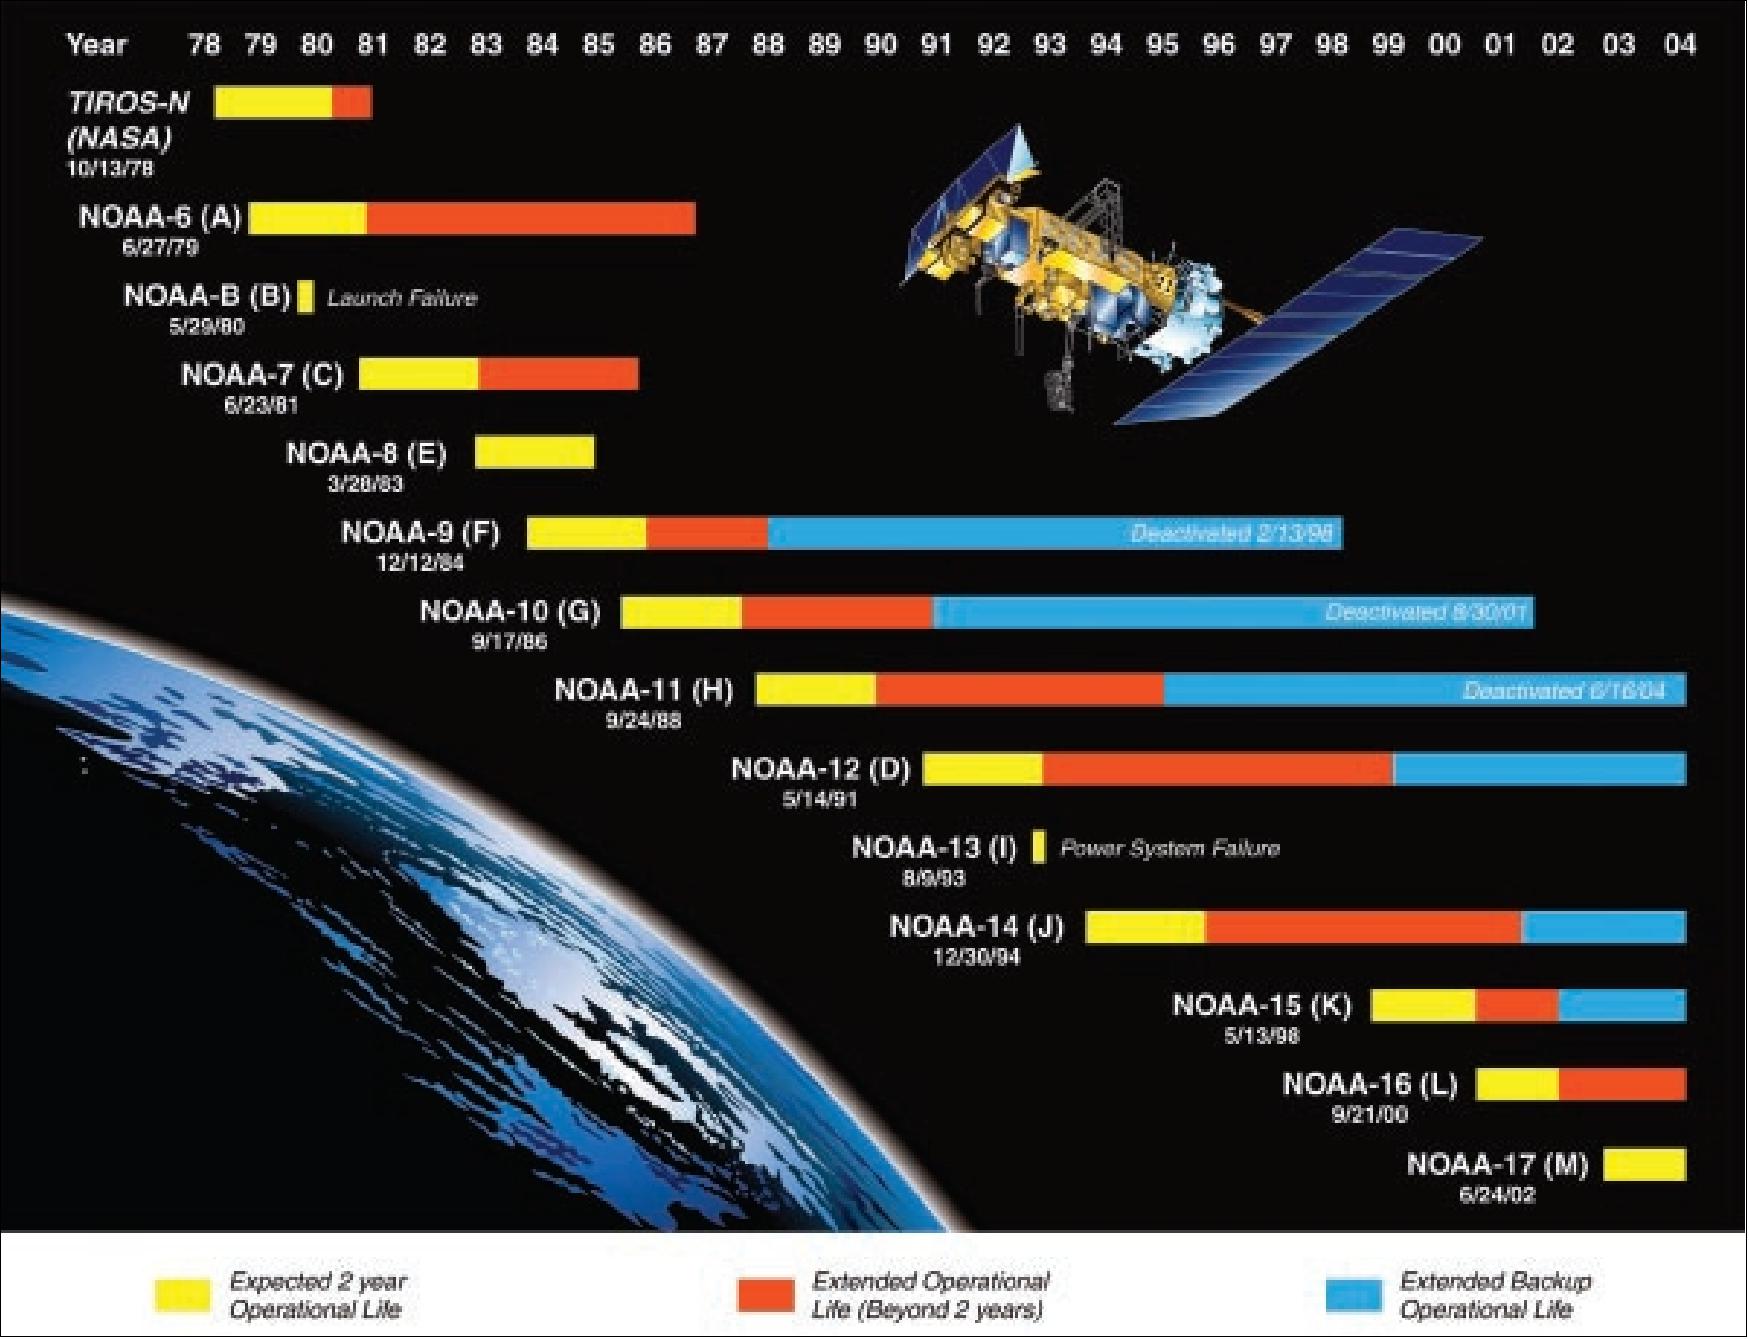 Figure 1: Overview of operational and extended lifetimes of the TIROS satellites (image credit: NOAA) 1)